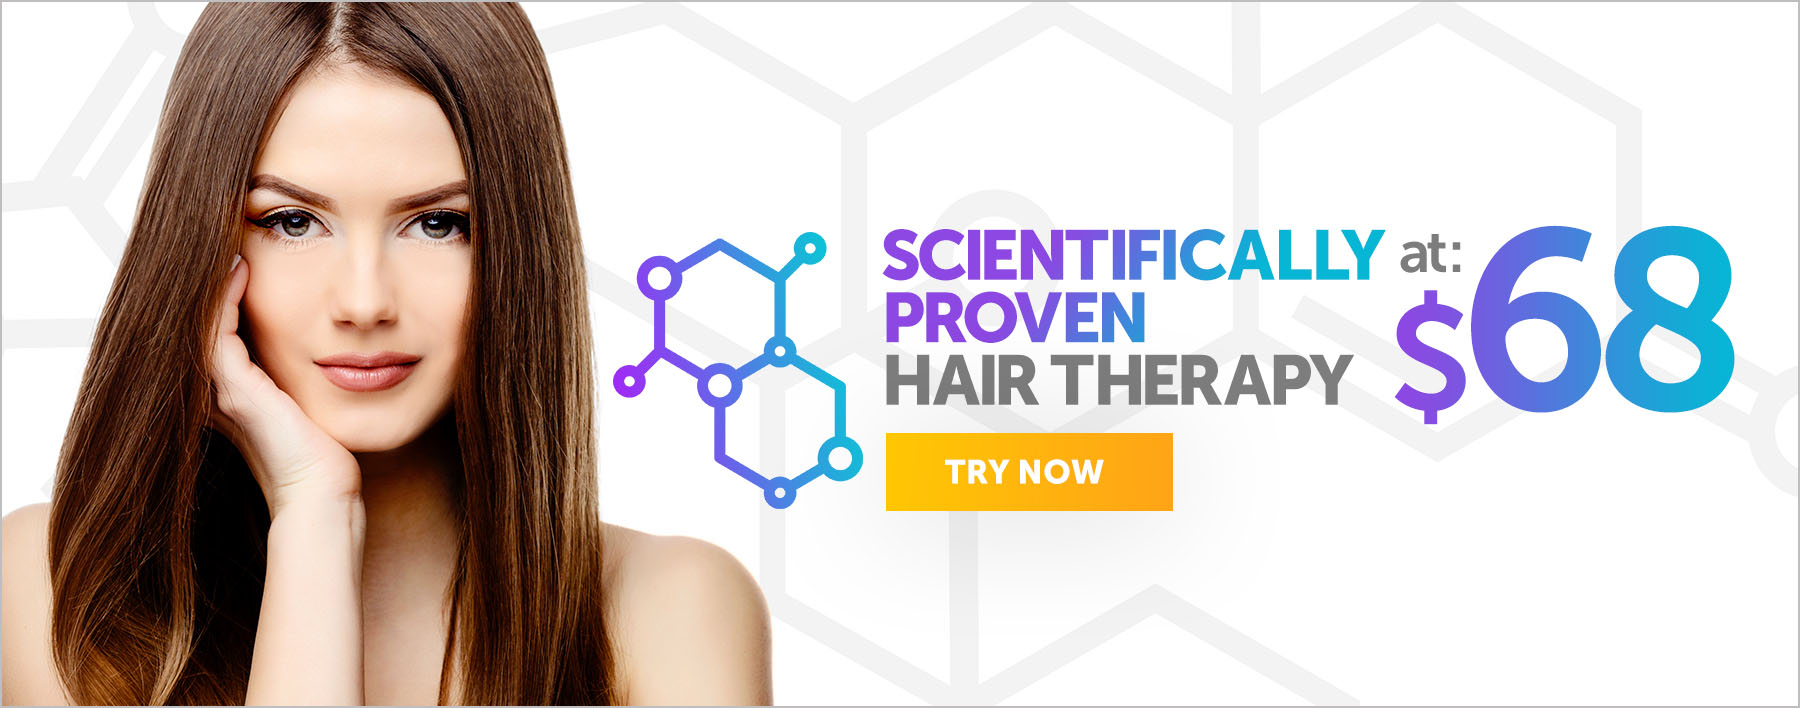 Scientifically Proven Hair Therapy at $68